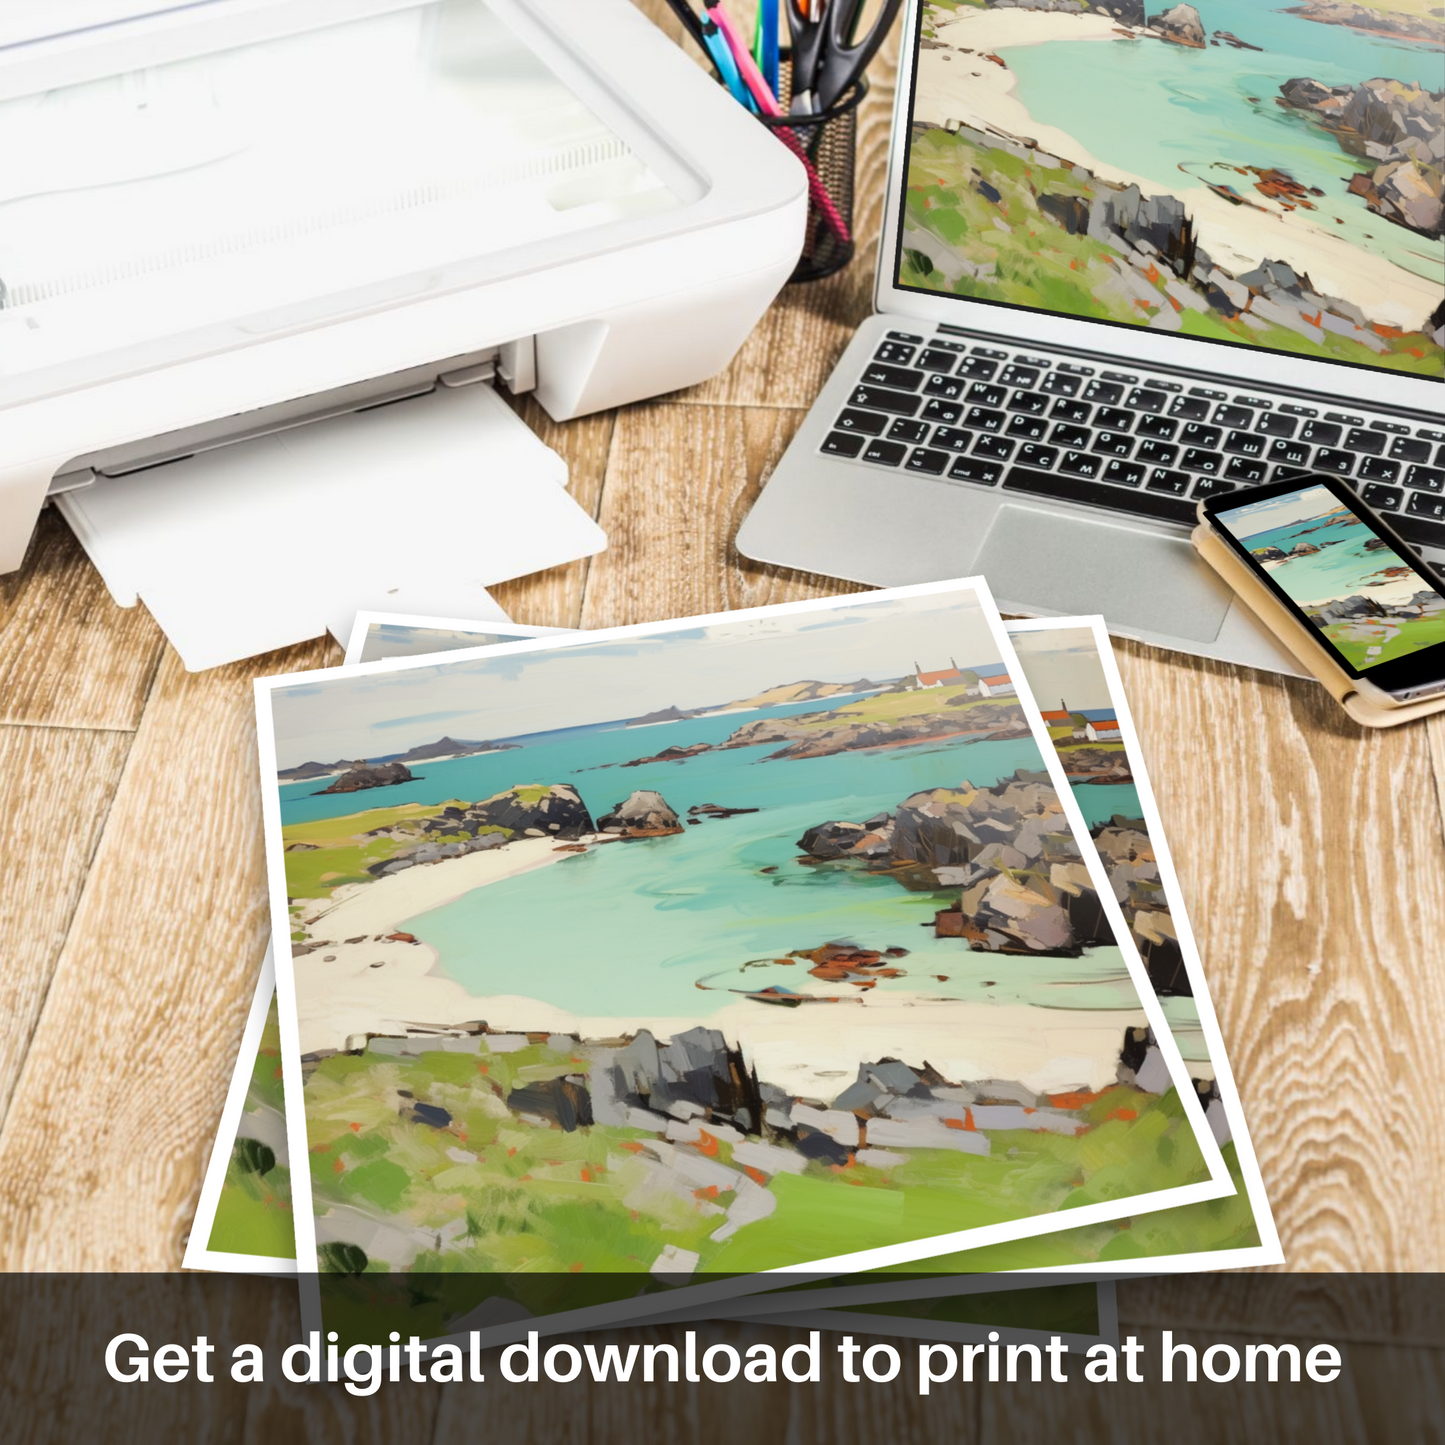 Downloadable and printable picture of Isle of Iona, Inner Hebrides